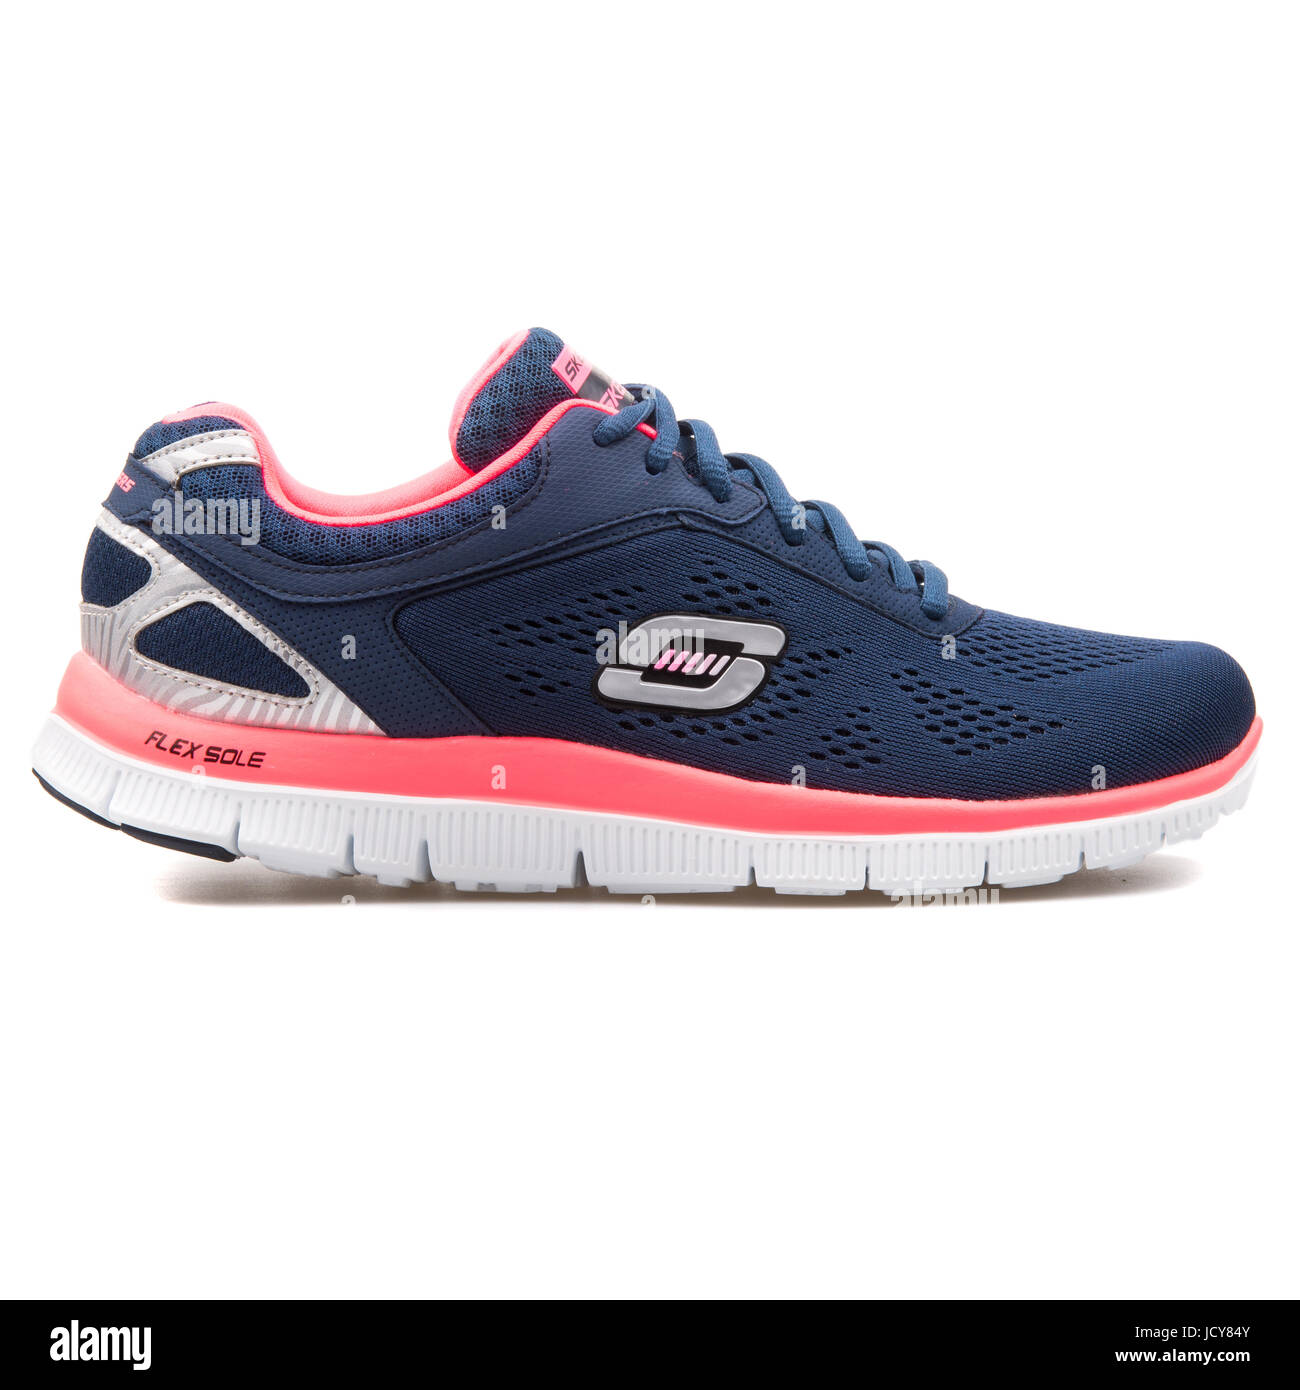 Skechers Flex Appeal Love Your Style Navy Blue and Hot Pink Women's Stock  Photo - Alamy